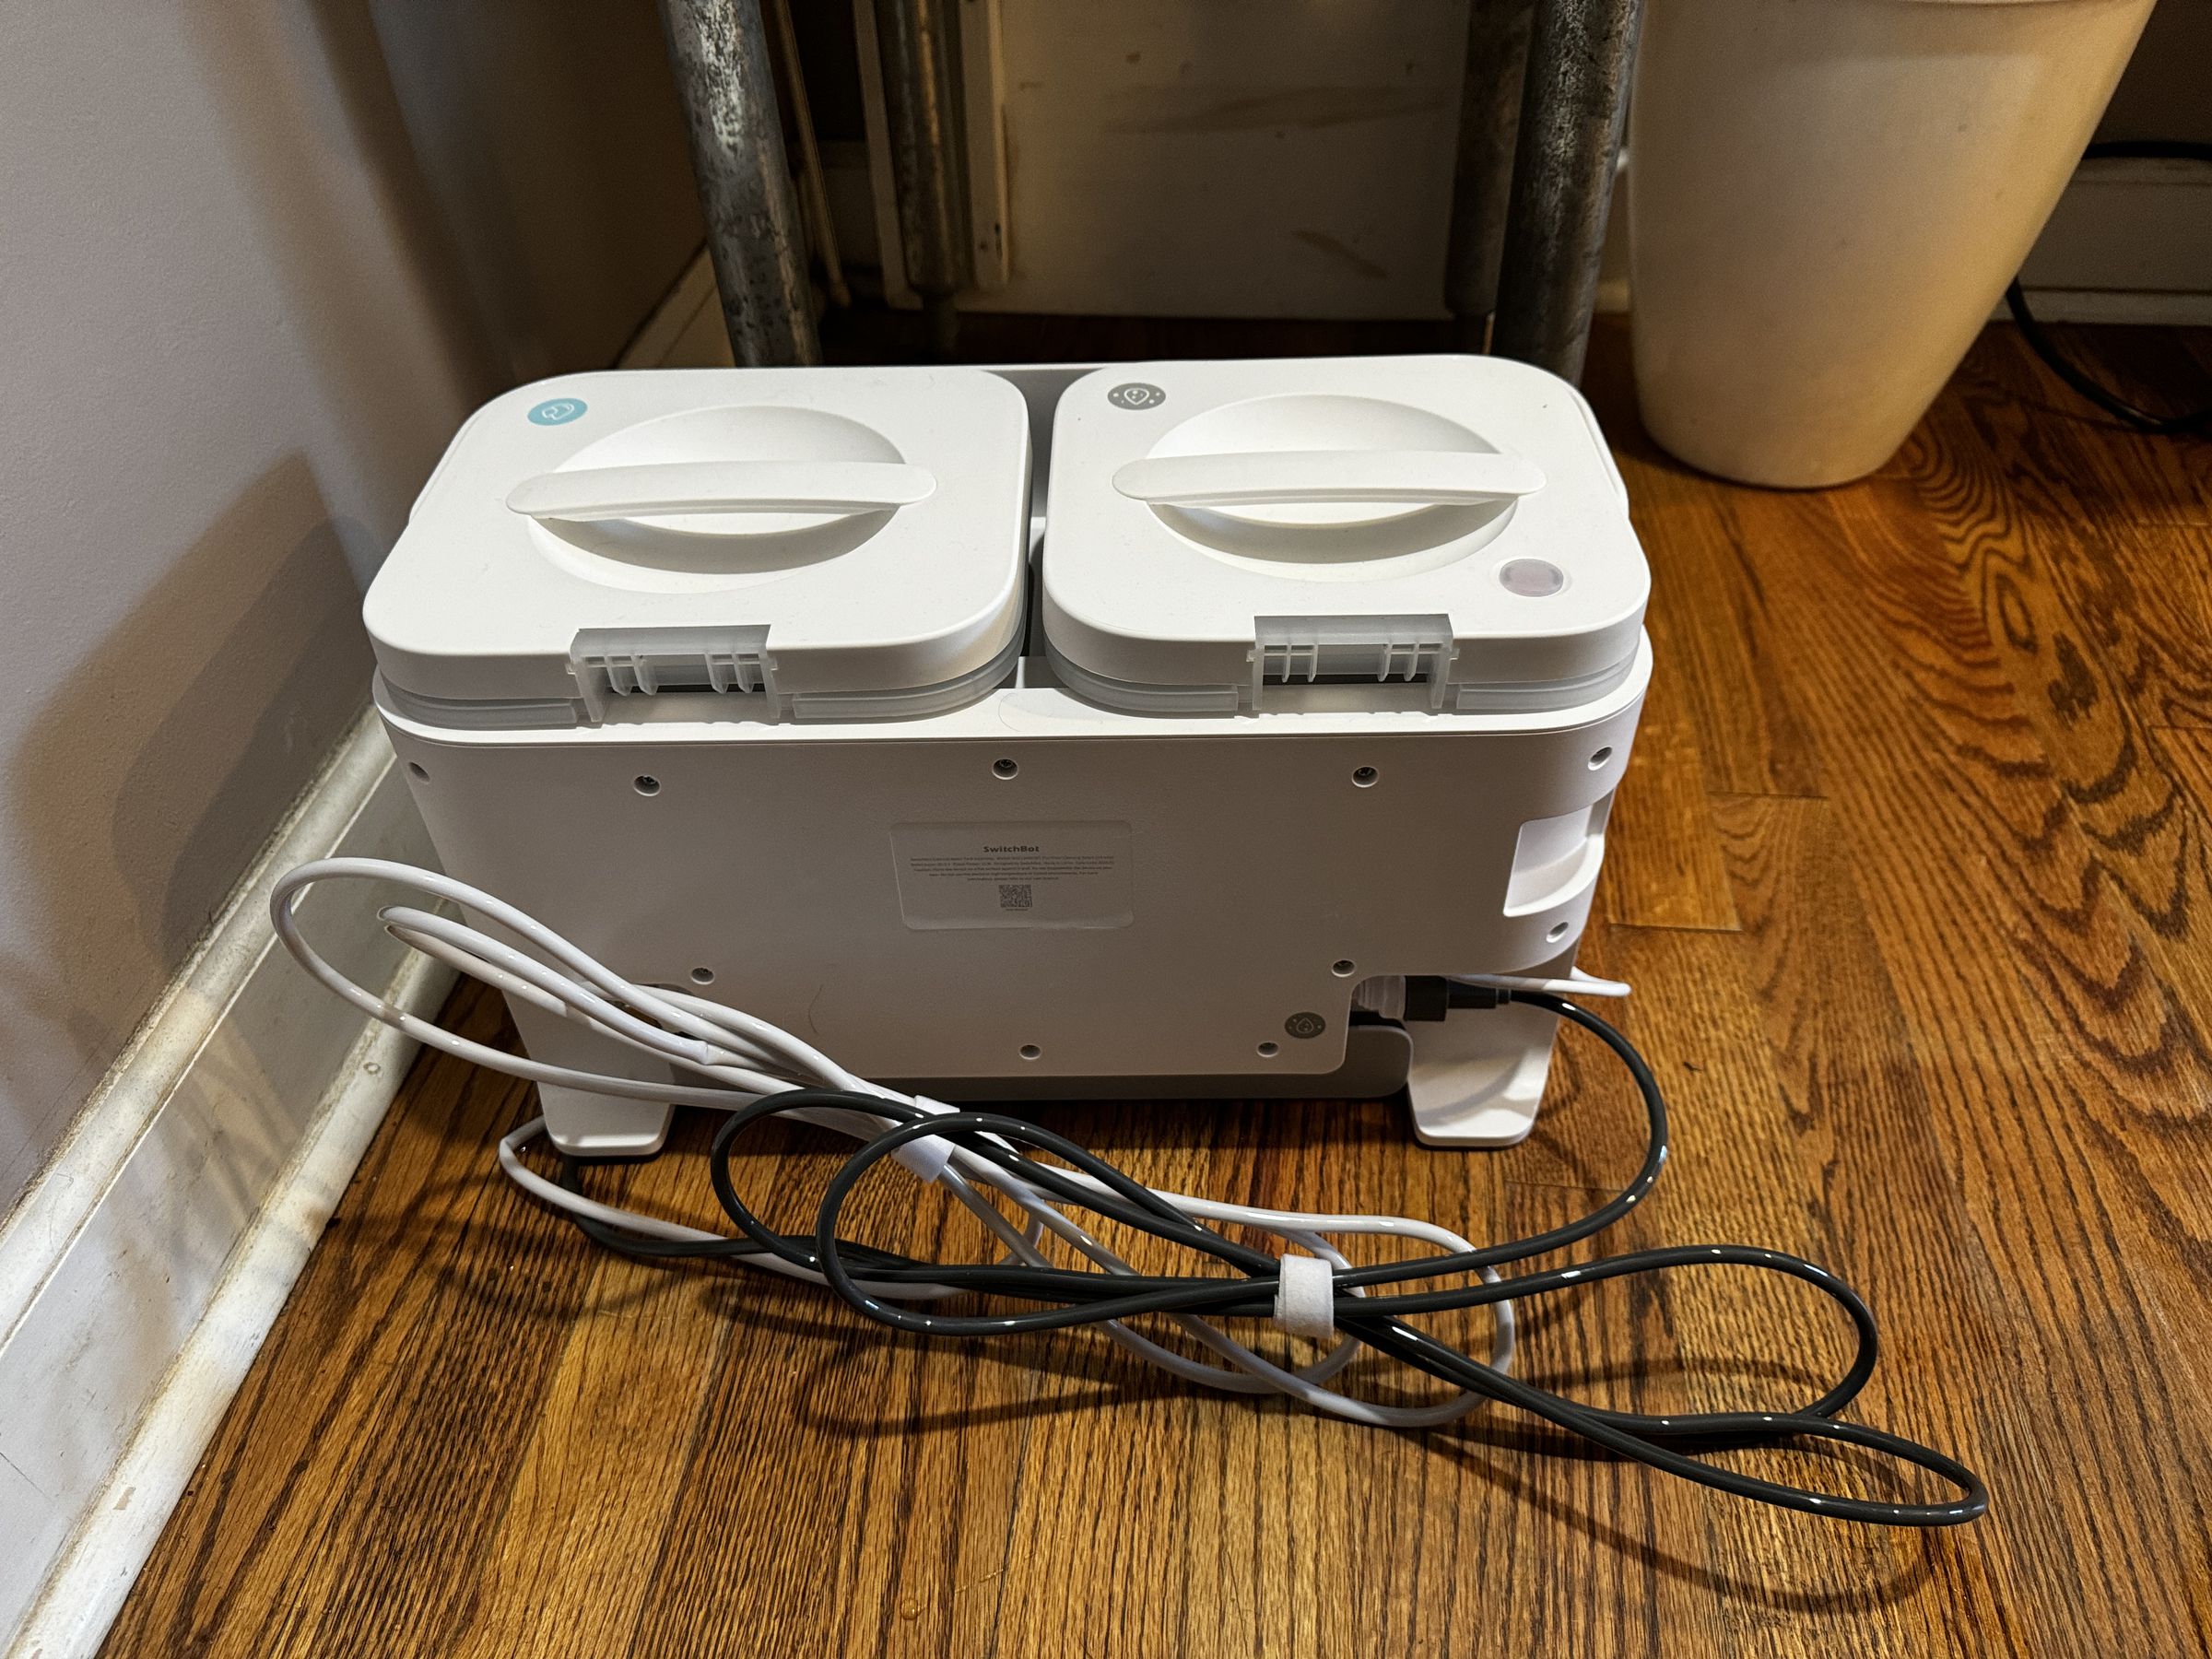 <em>If you can’t hook into your plumbing, SwitchBot will sell a standalone water tank for $80. But that leaves you with a lot of piping to deal with.</em>